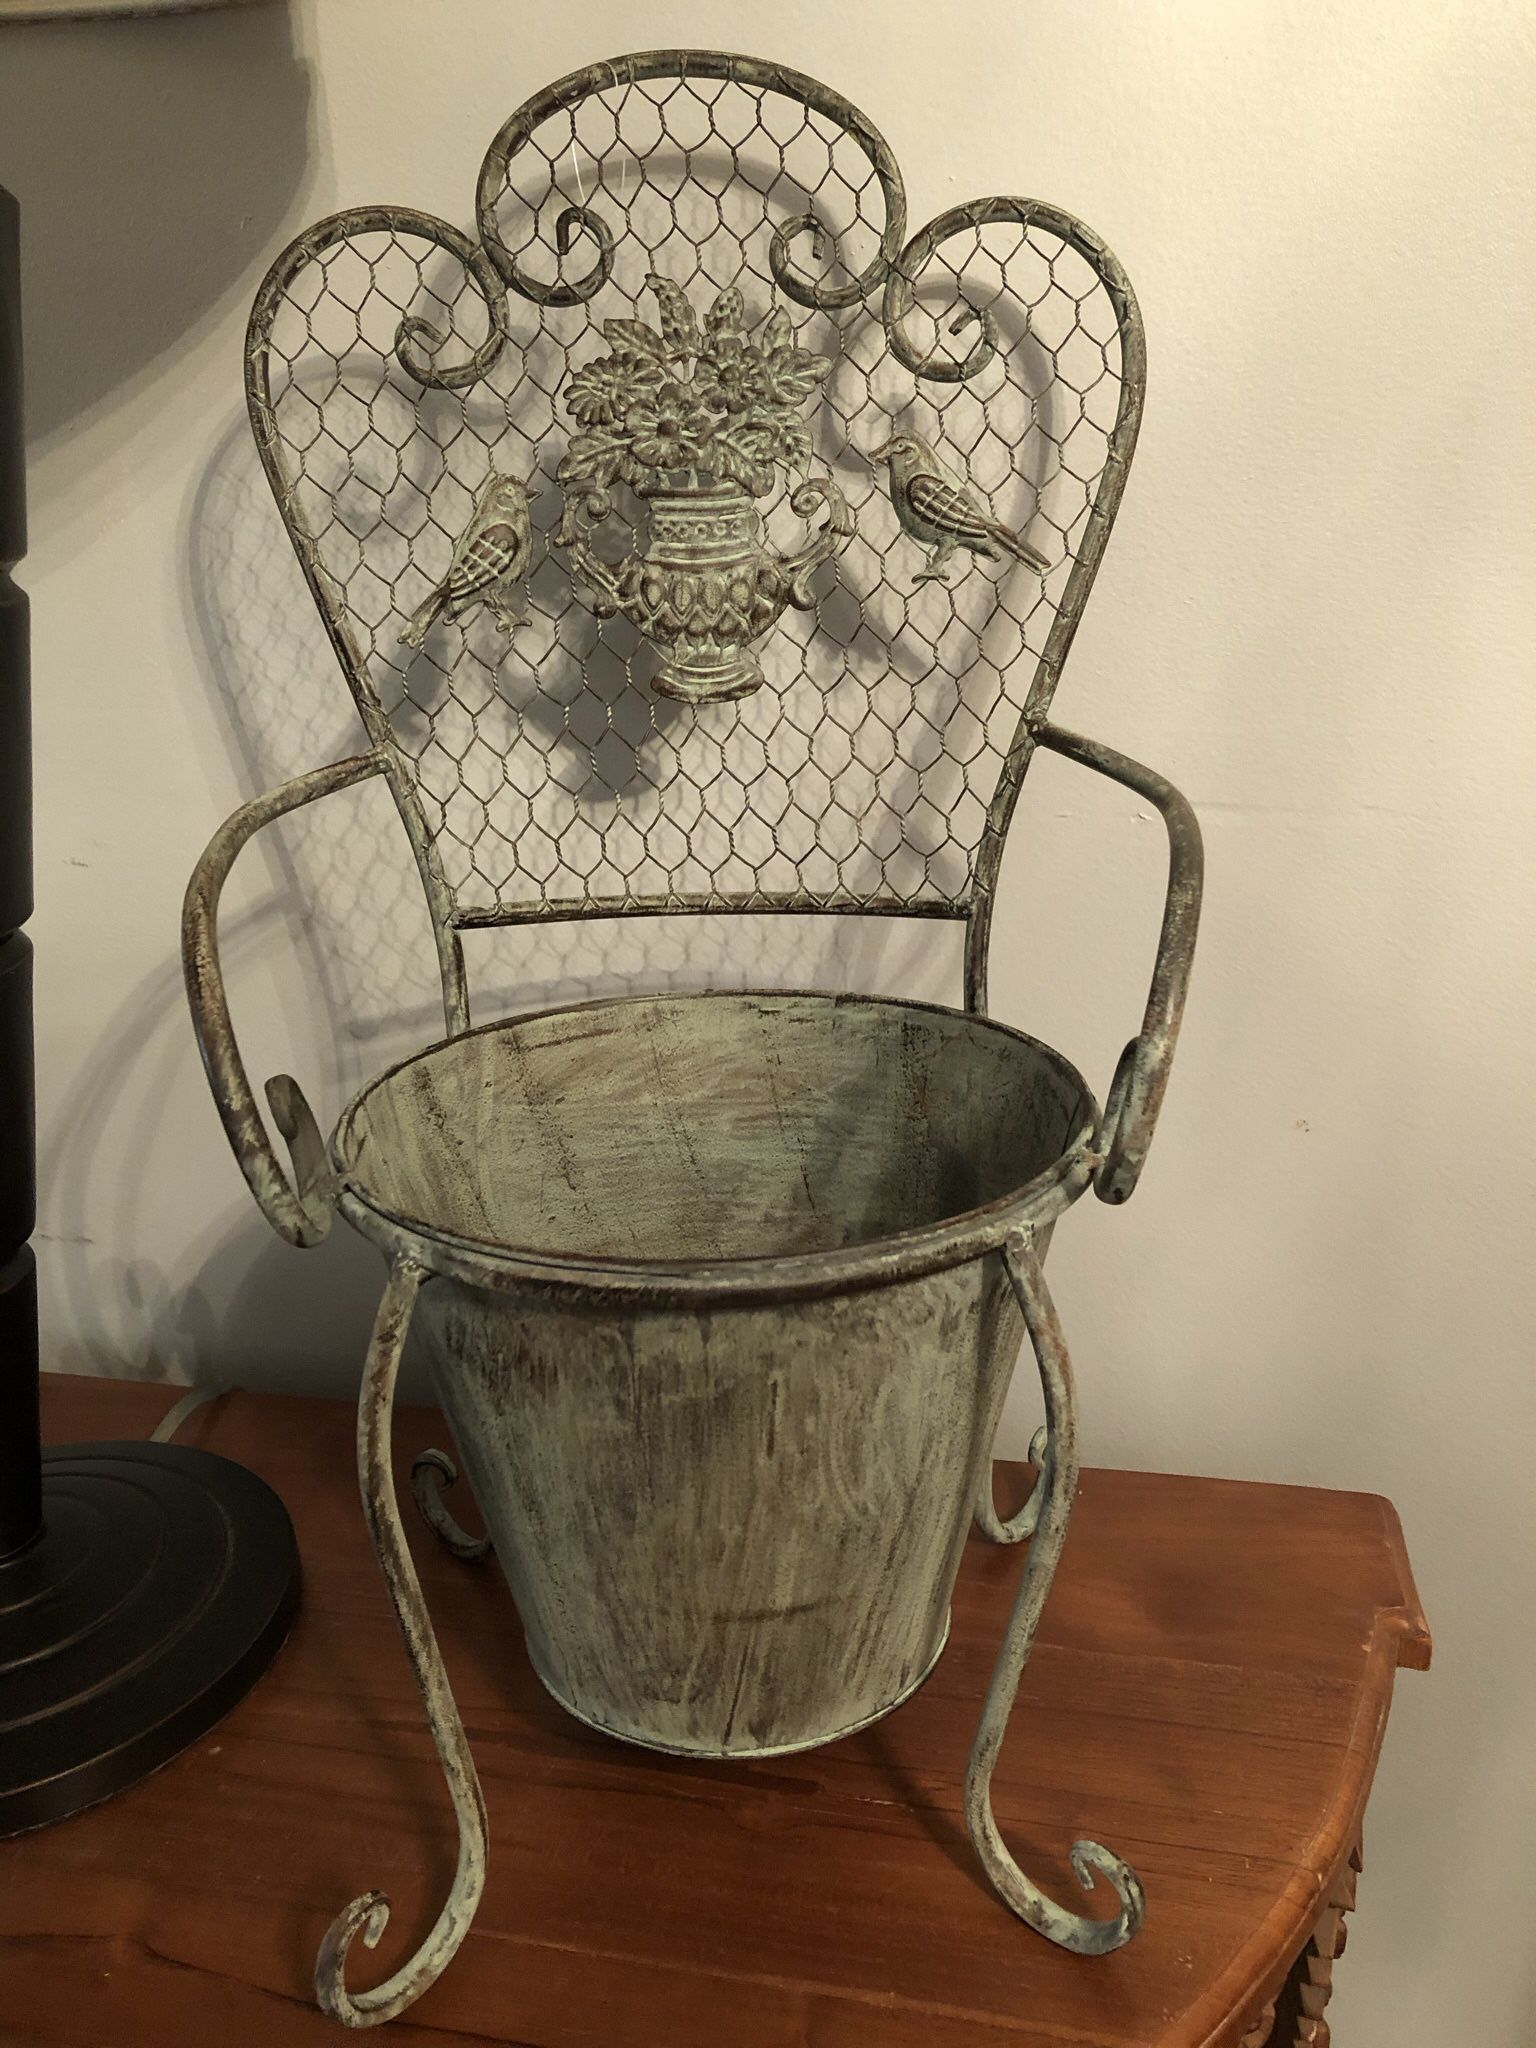 Chair Flower Pot/Planter/ Container $25( Firm)